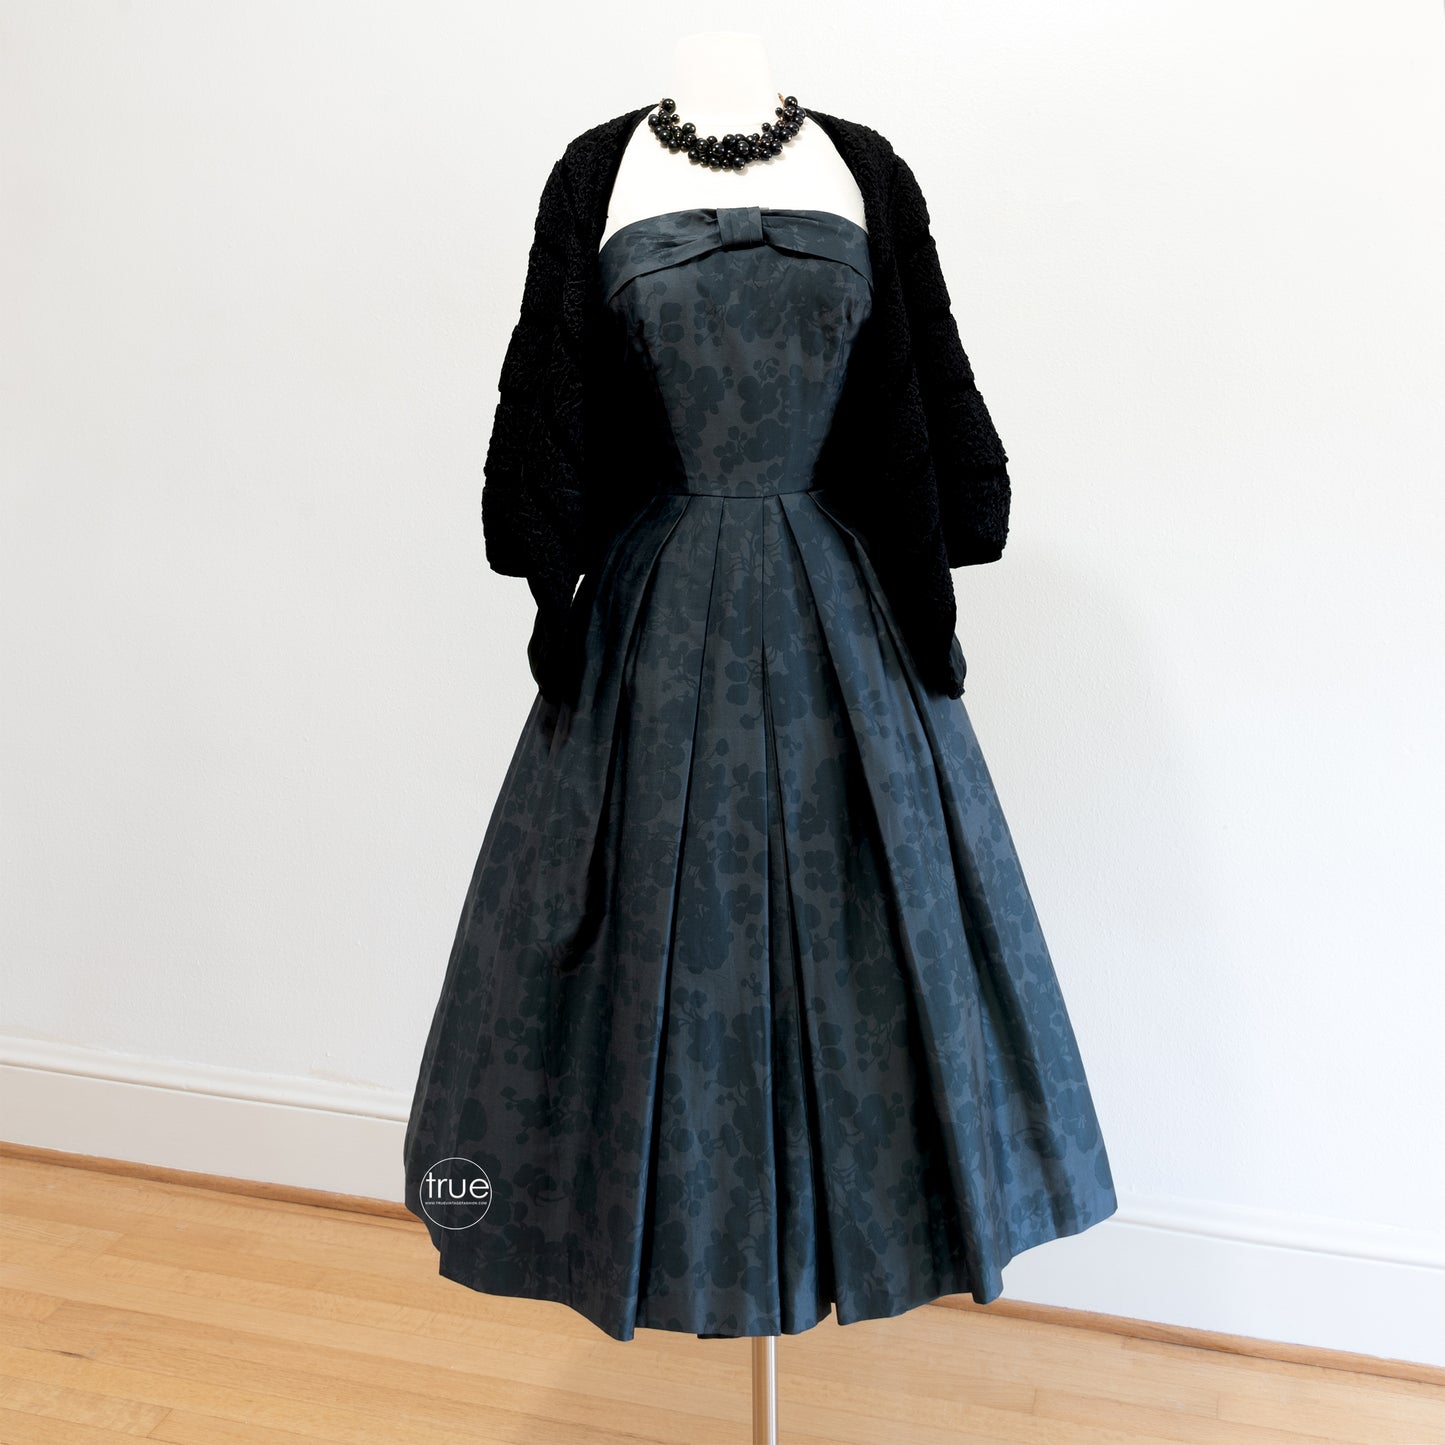 vintage 1950's dress ...gorgeous deep pewter with floral shadow print rich cotton sateen full skirt dress